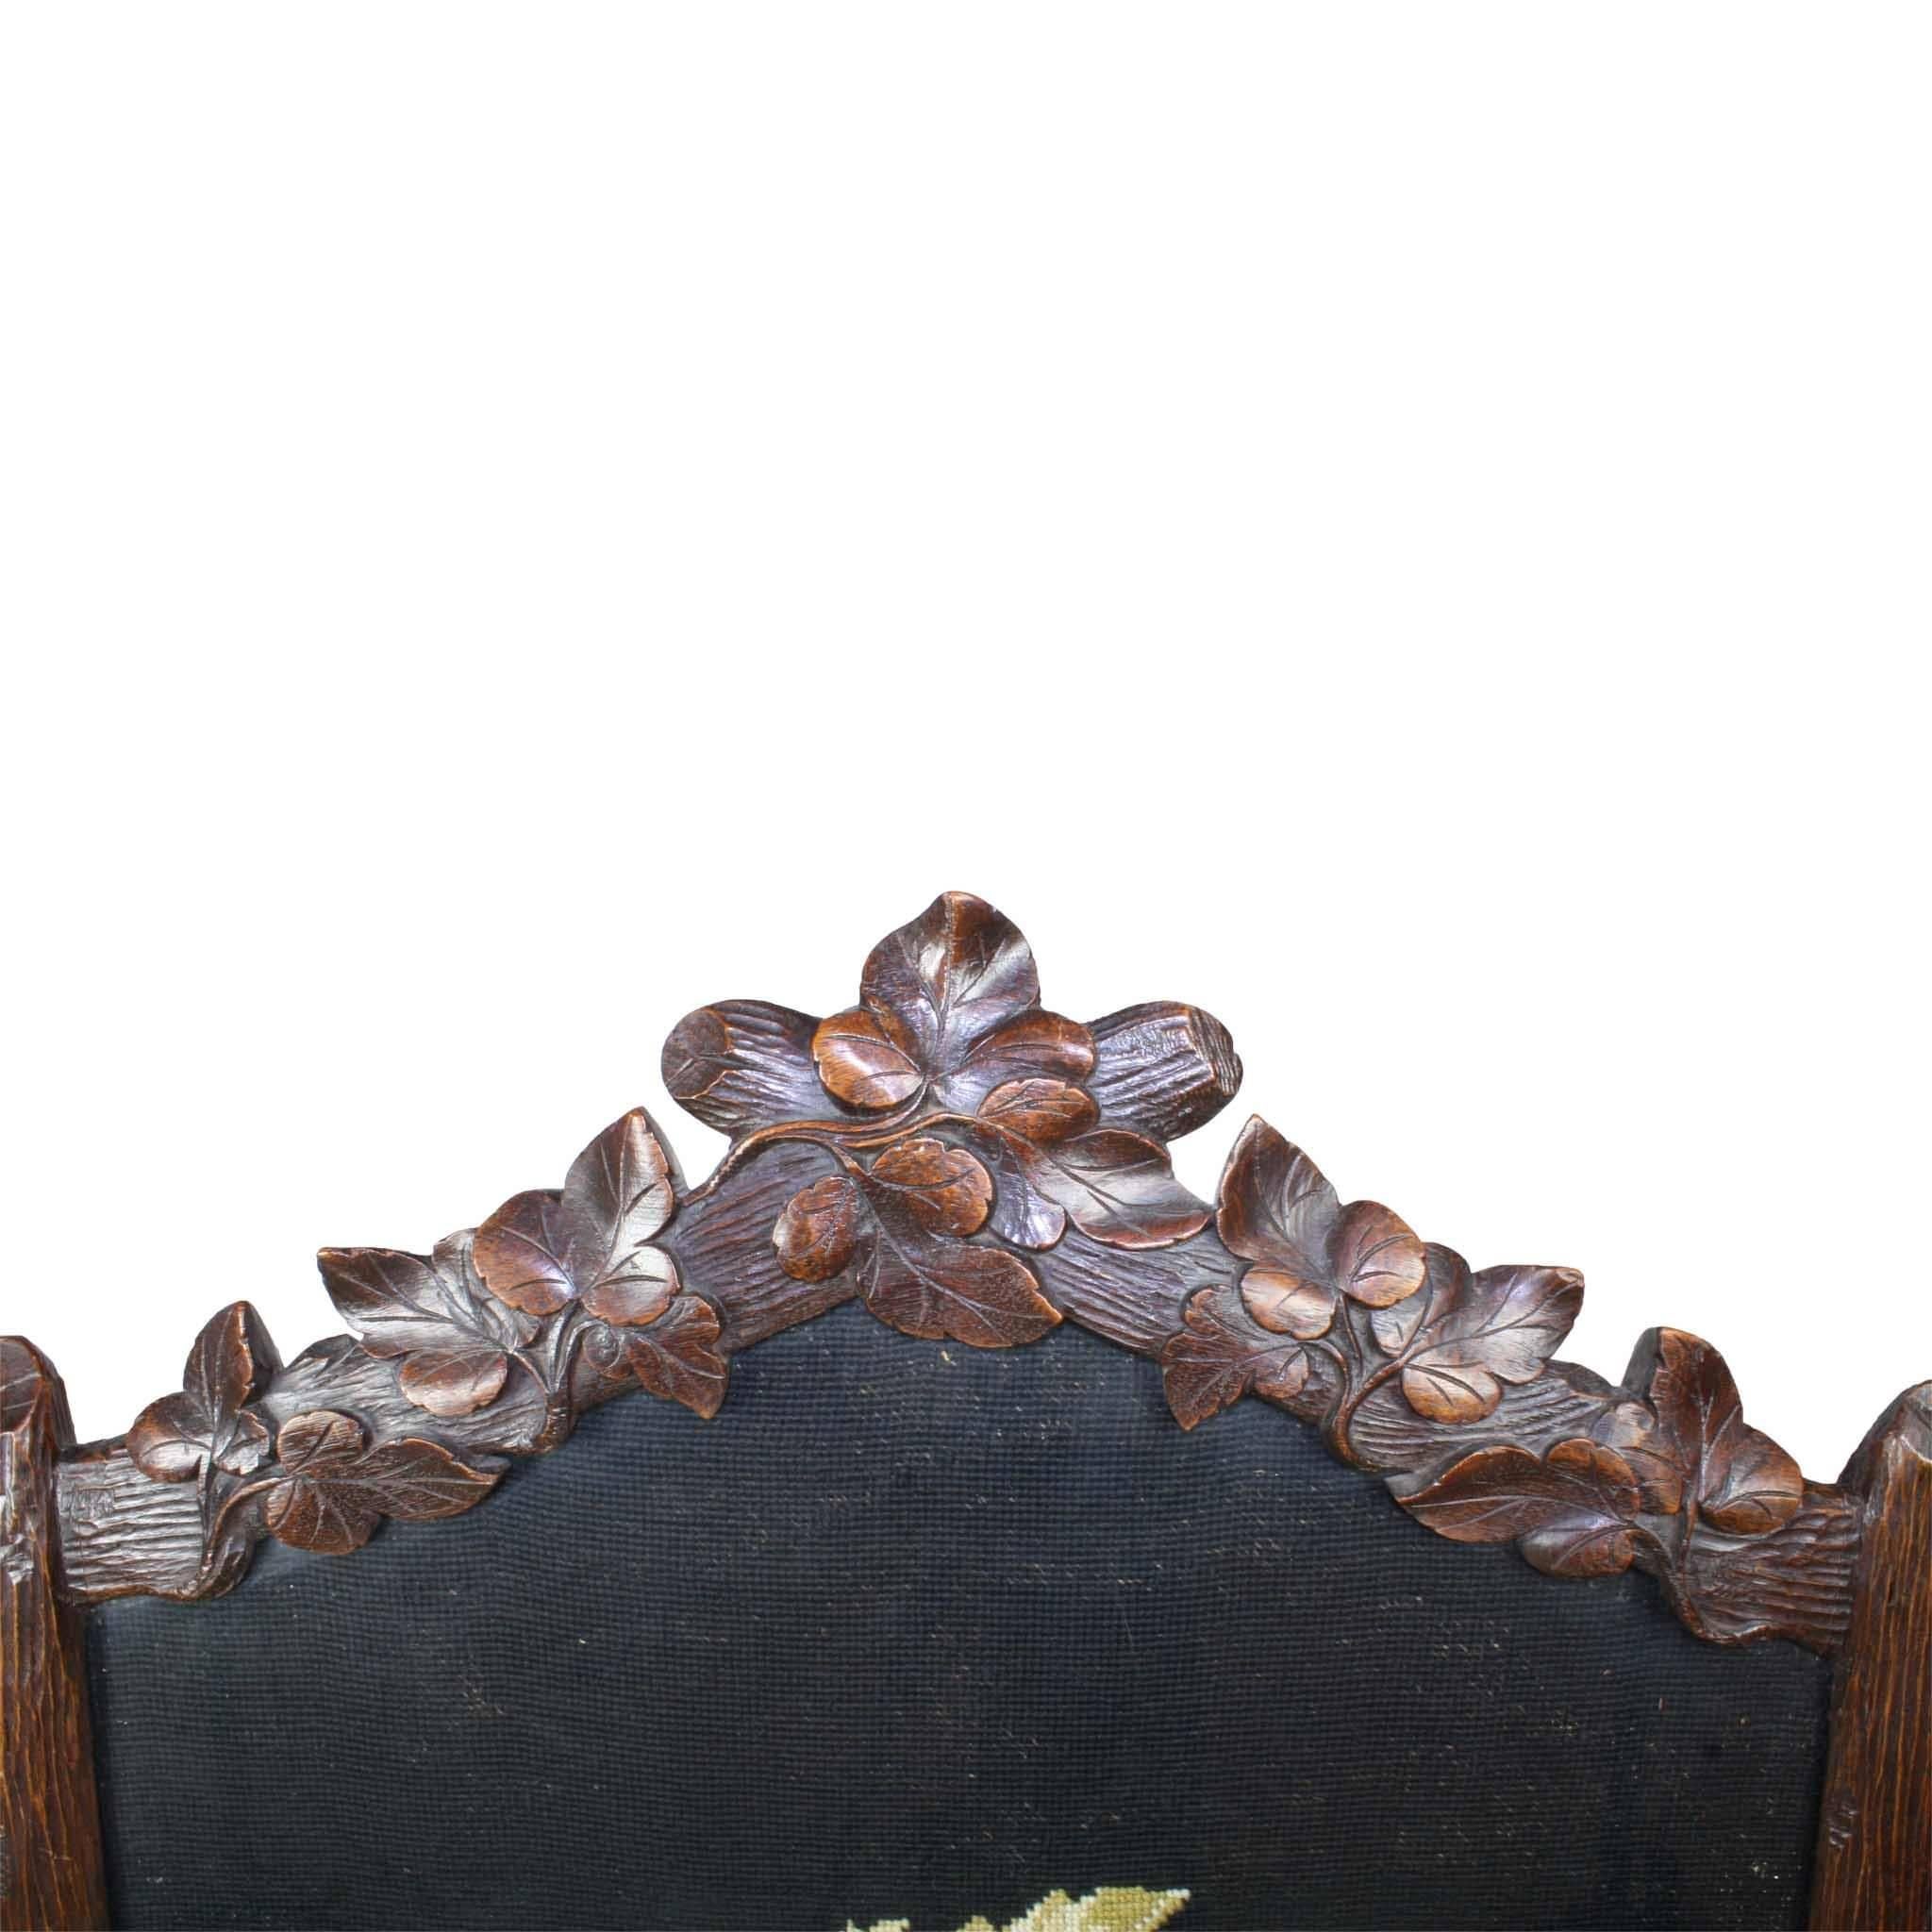 This floral needlepoint bouquet on a black background was added to this Swiss fireplace screen in the early 20th century. A handwritten note written in Dutch on the back of the screen reads May 15, 1936 by H. J. Boxman Muhl, most likely the person